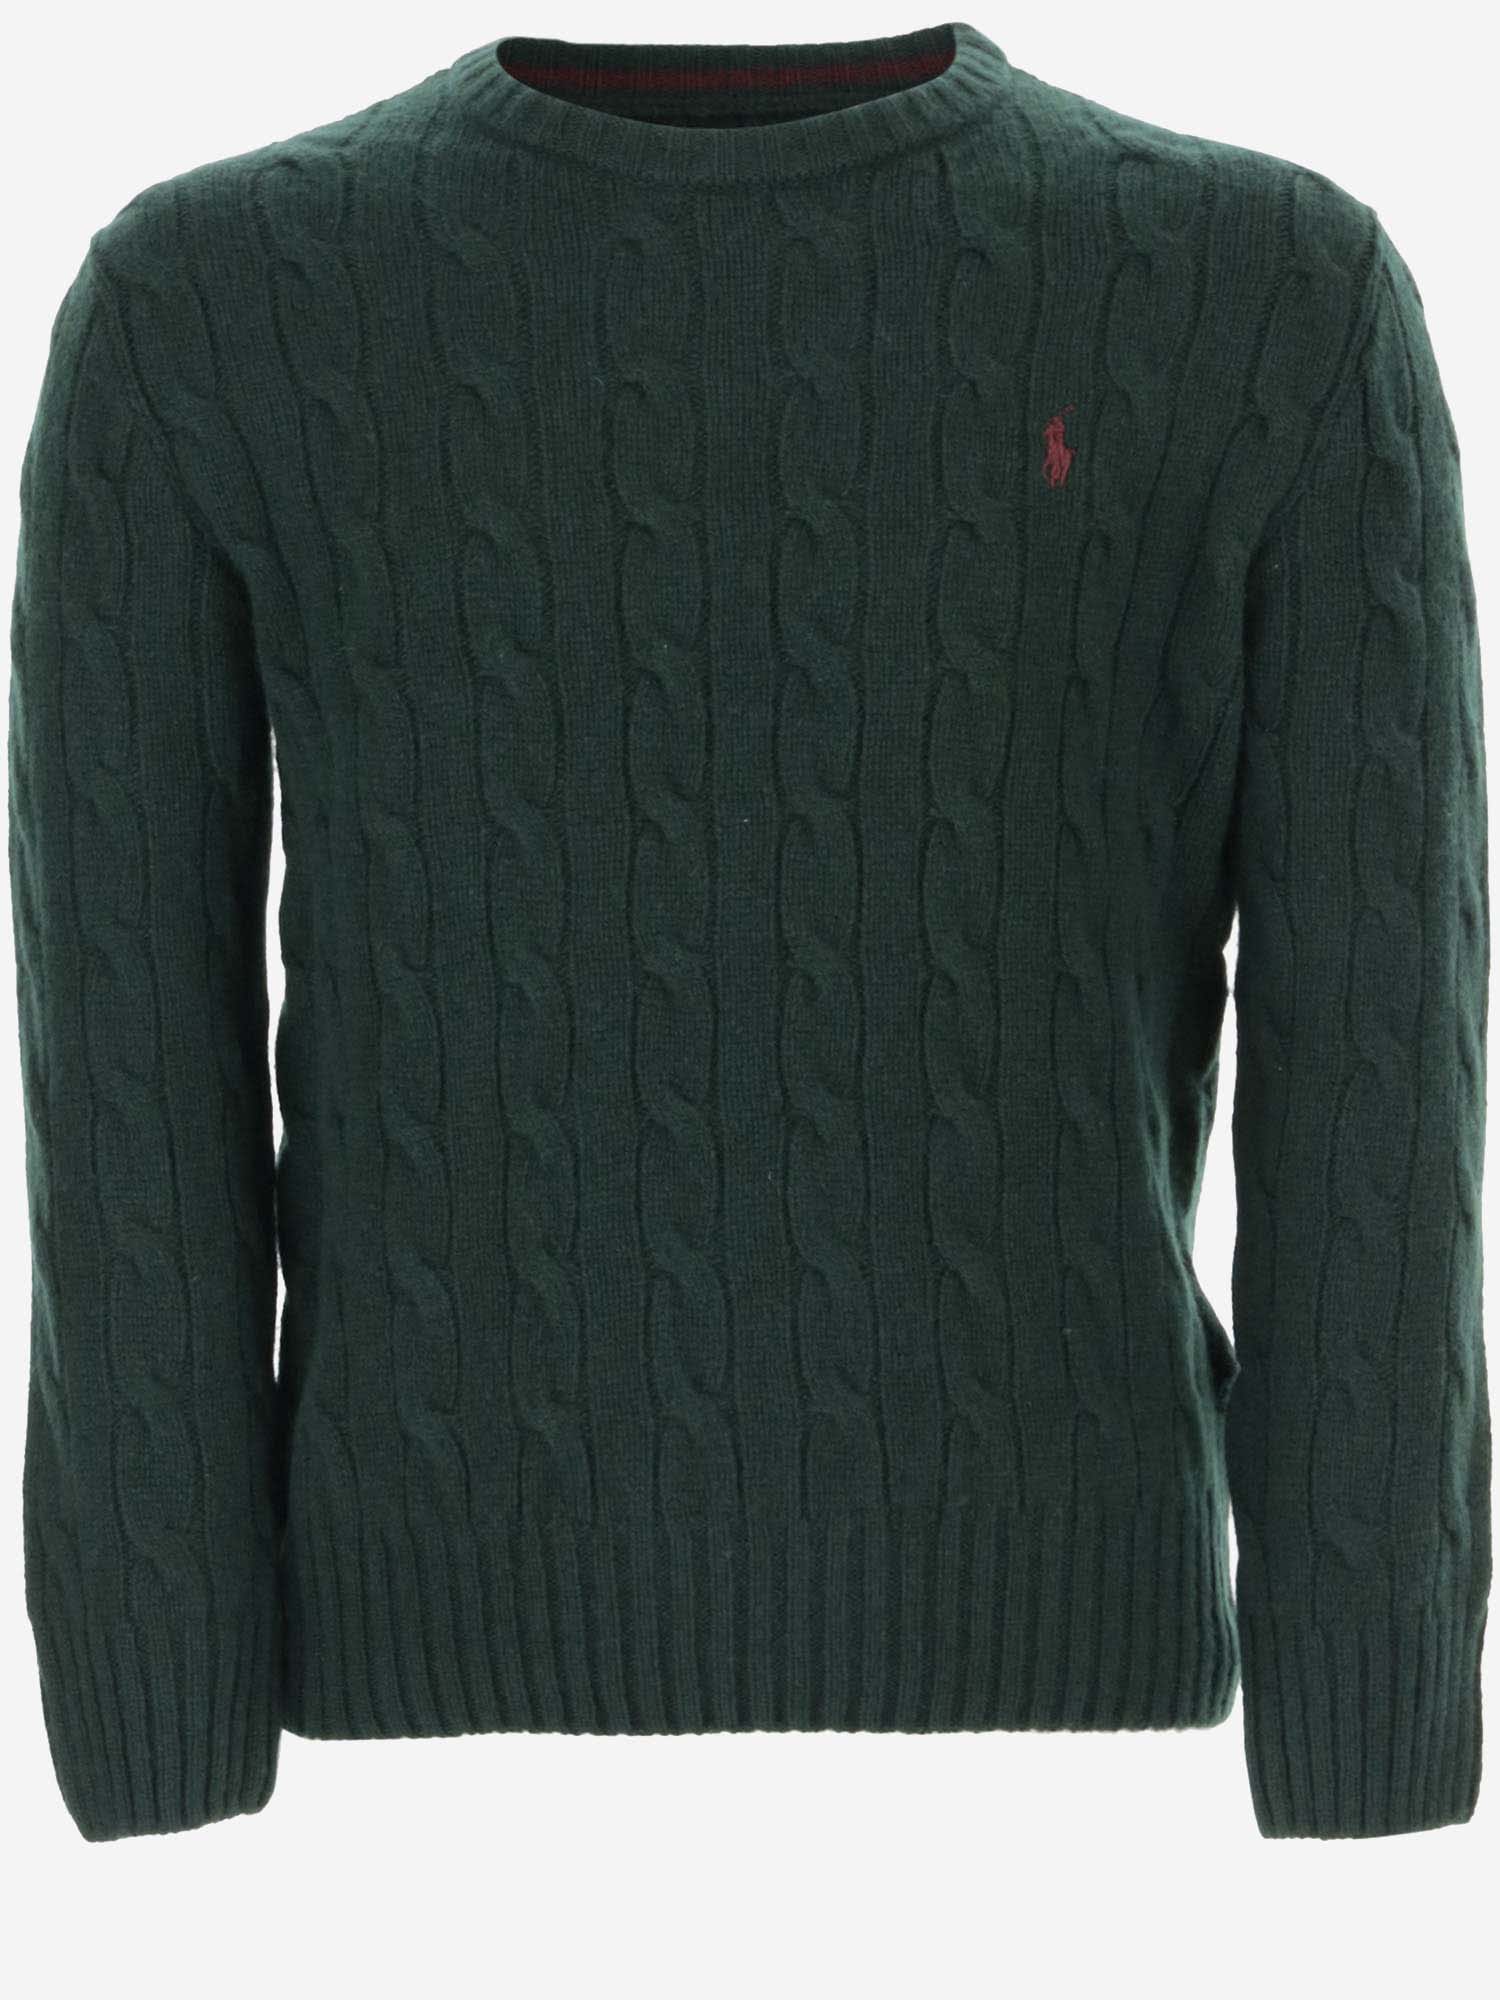 Ralph Lauren Kids' Wool And Cashmere Sweater In Moss Agate